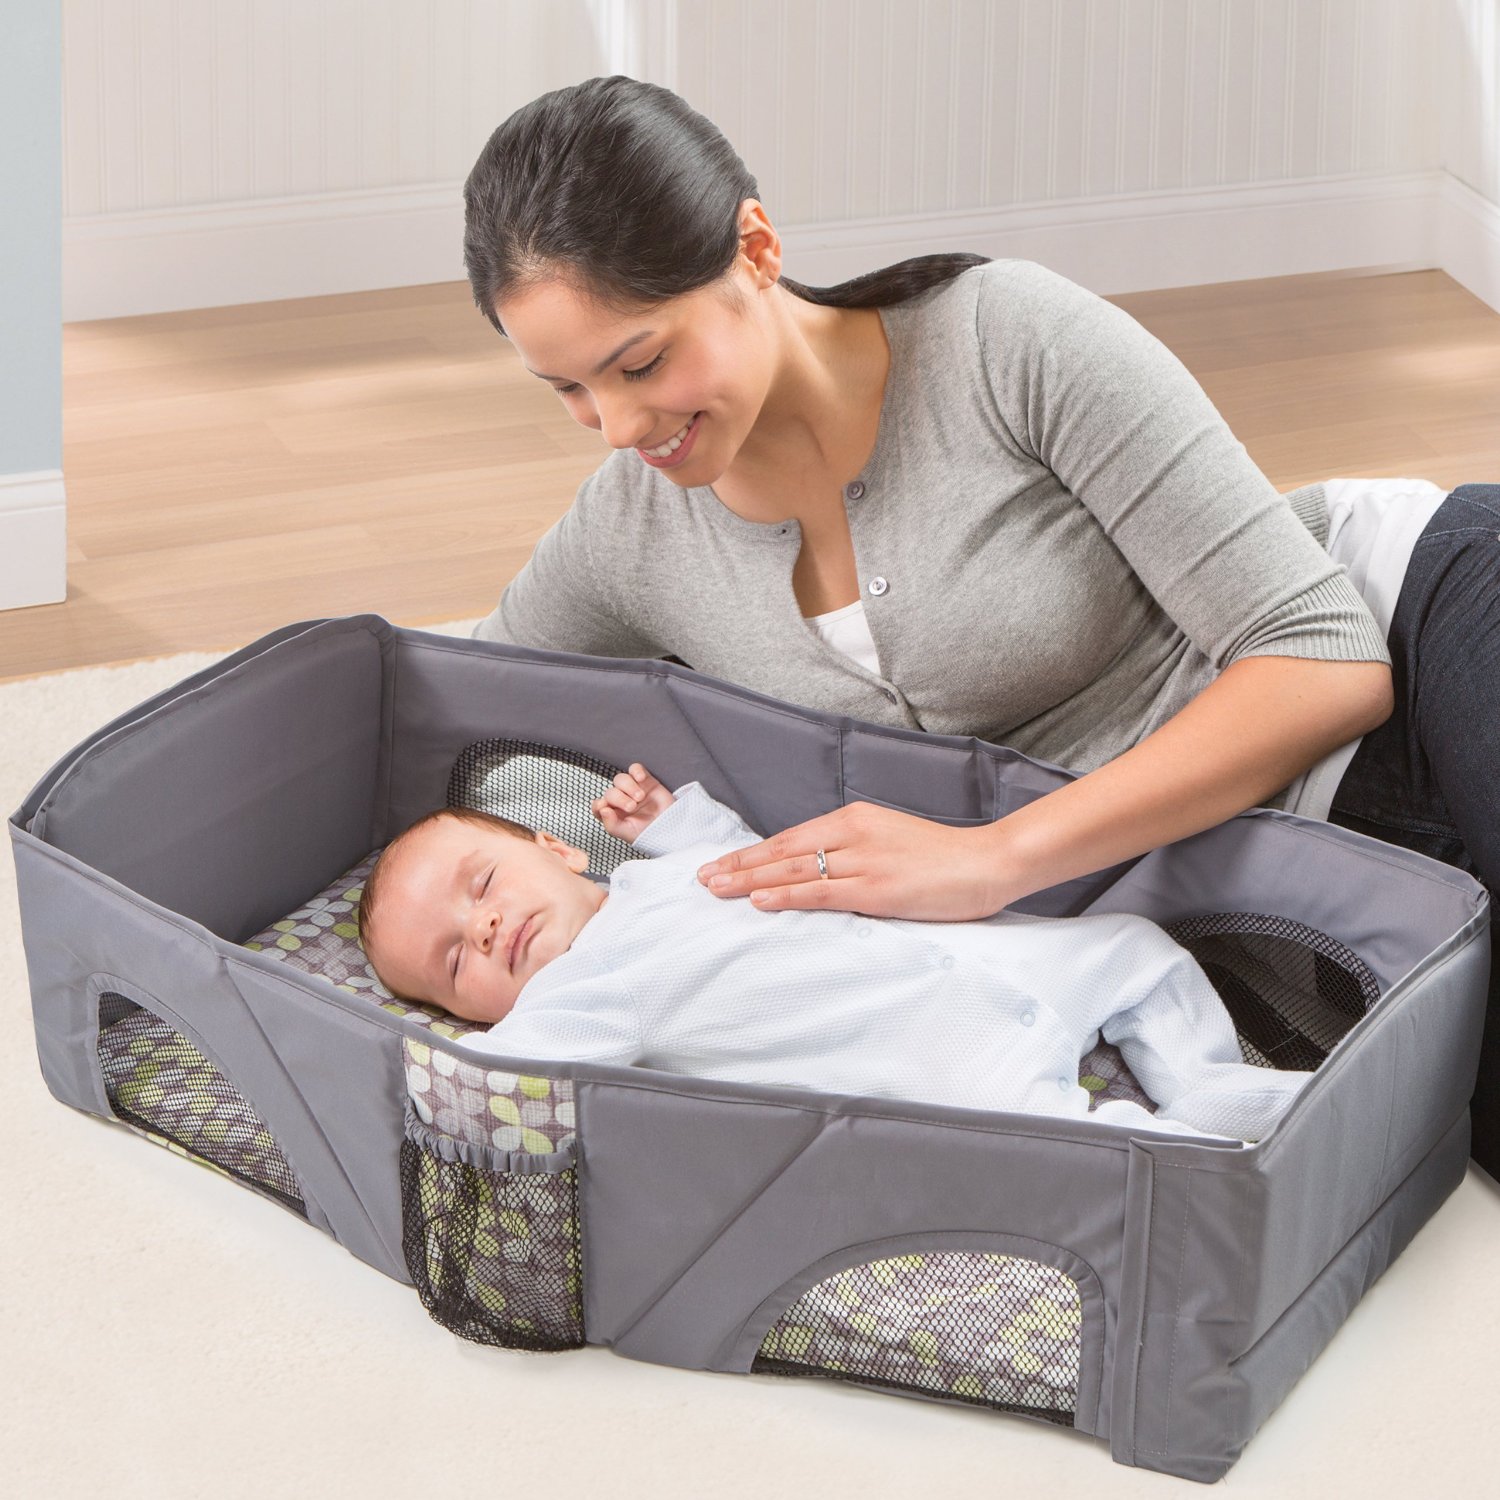 baby bed to go